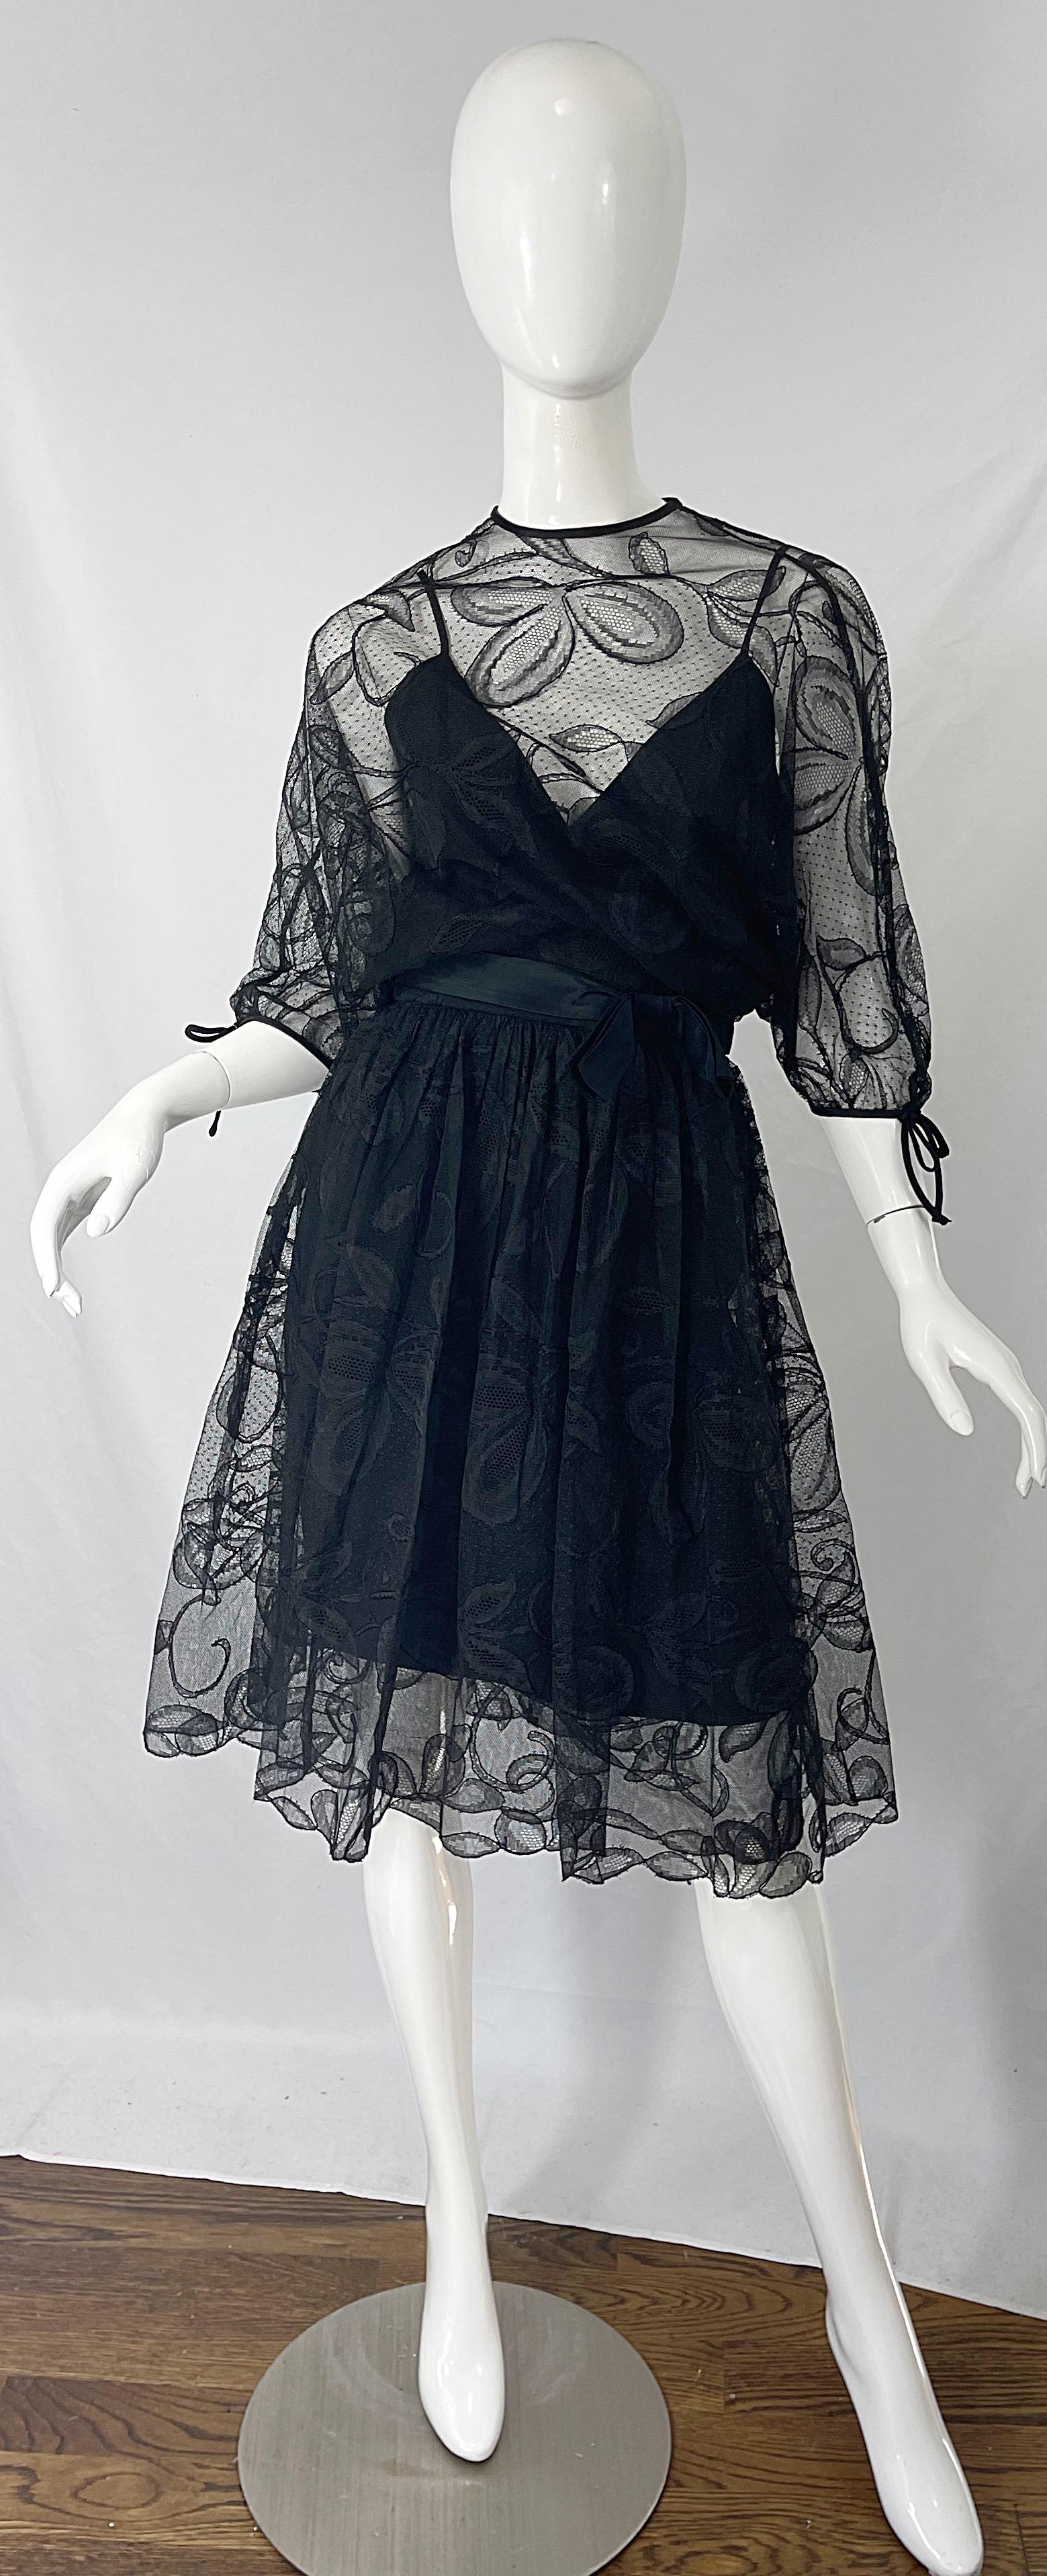 Chic mid 60s DONALD BROOKS black silk lace overlay 3/4 sleeves dress ! Features a spaghetti strap bodice with hidden metal zipper up the back. Lace overlay has 3/4 sleeves with bows at each cuff. Attached bow belt. Hidden snaps up the back. The